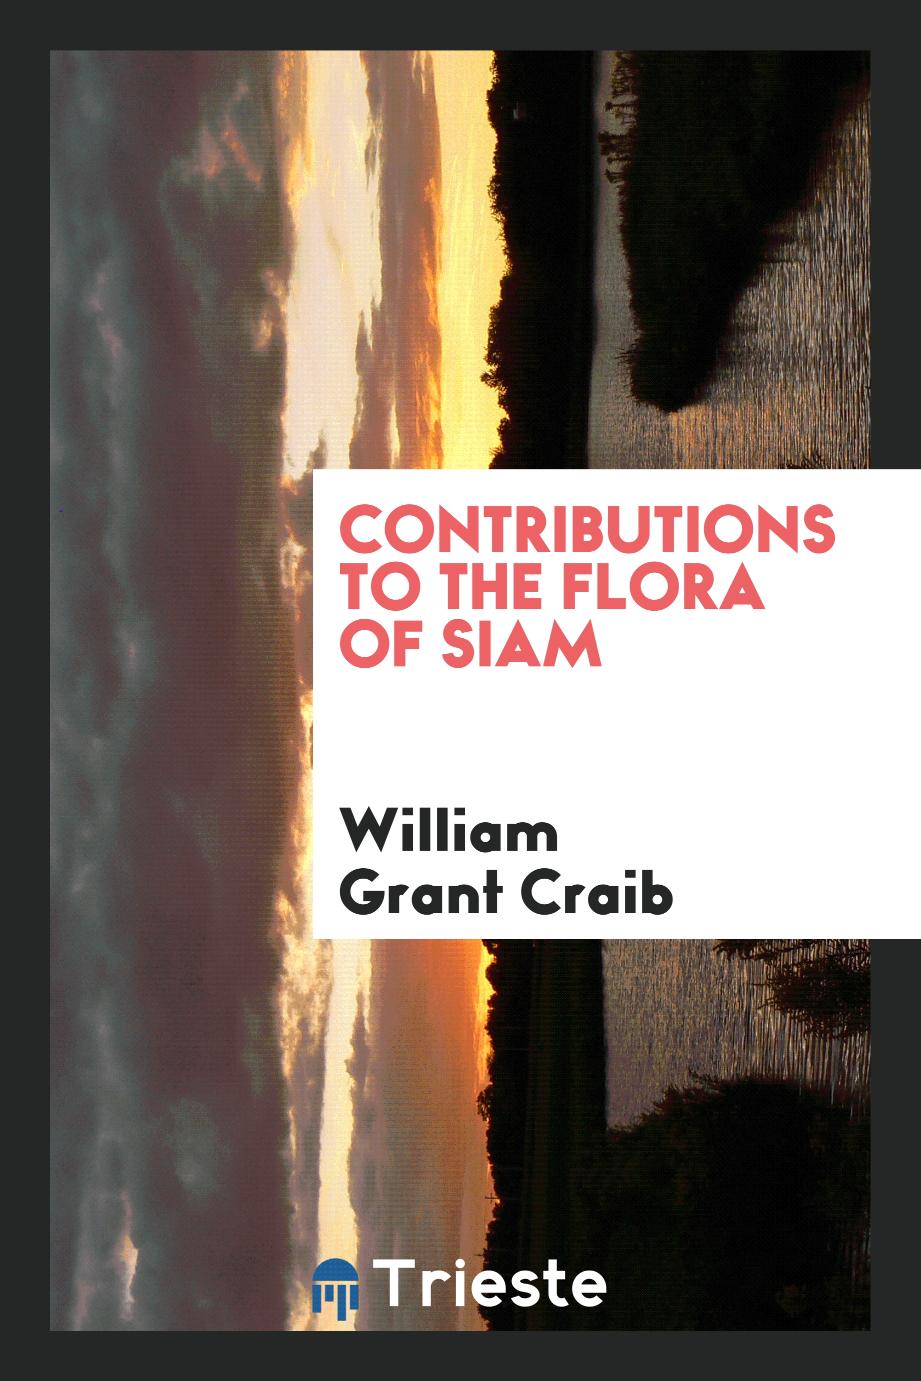 Contributions to the flora of Siam